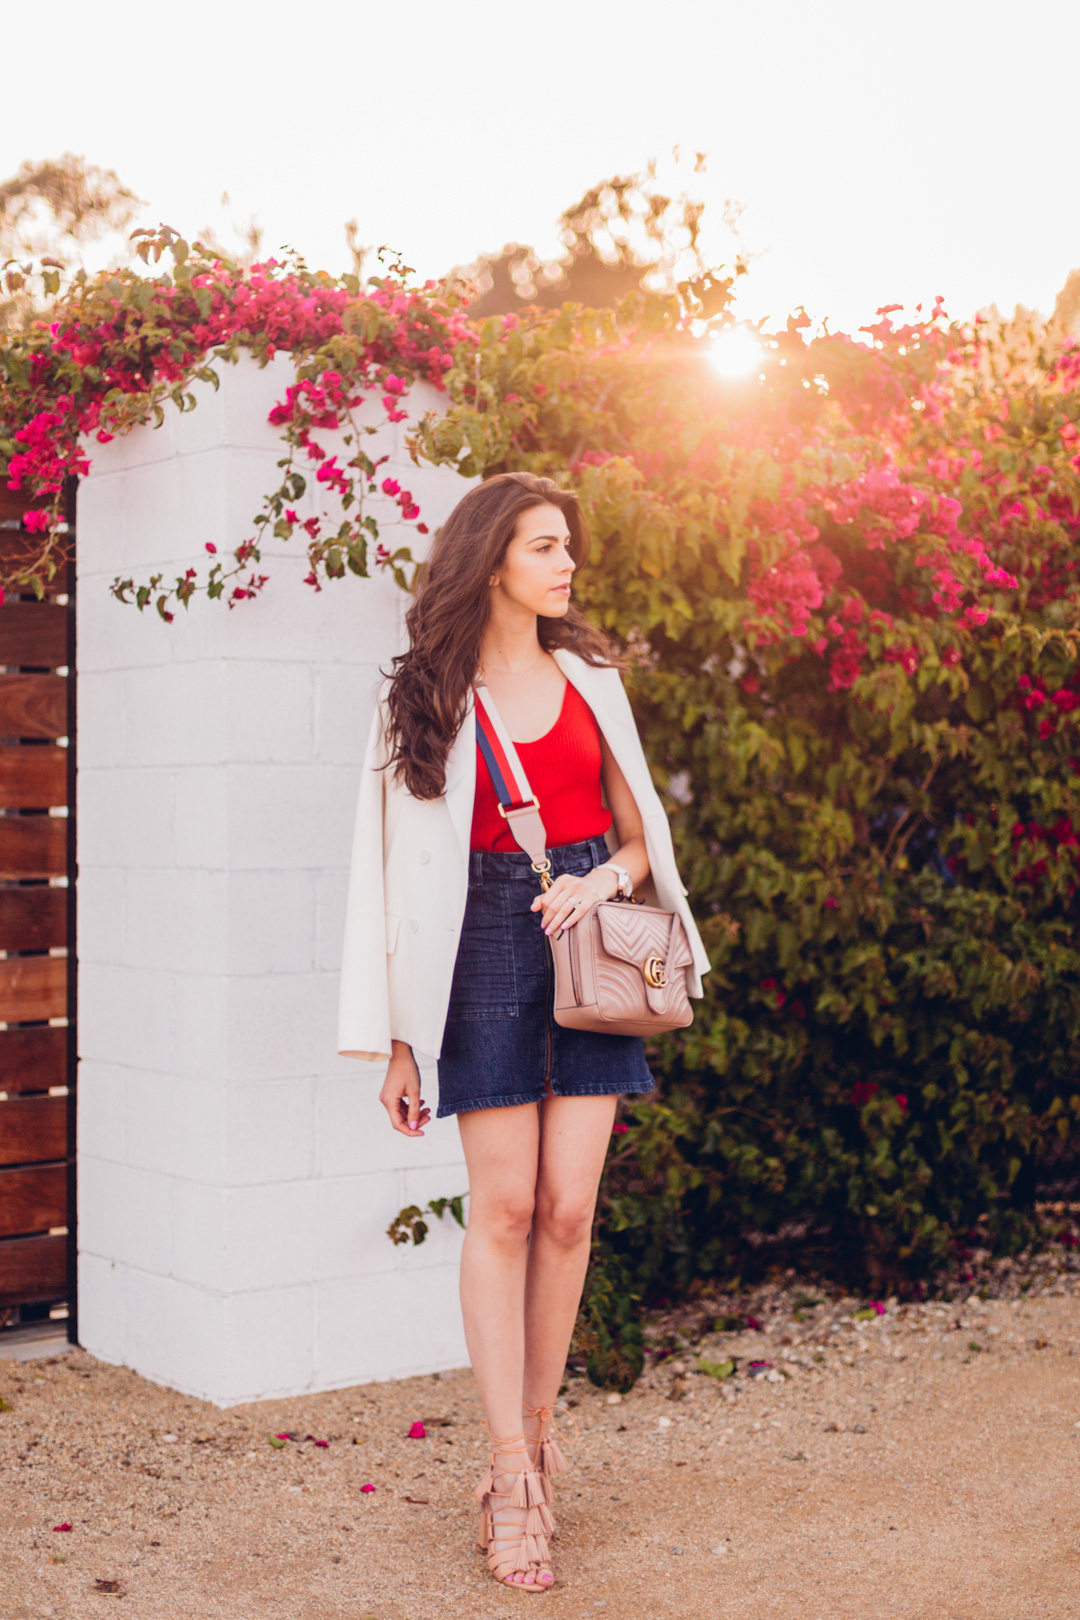 Jackie Roque styling a red, white and blue outfit in Malibu. Featuring the Gucci GG Marmont Shoulder Bag 